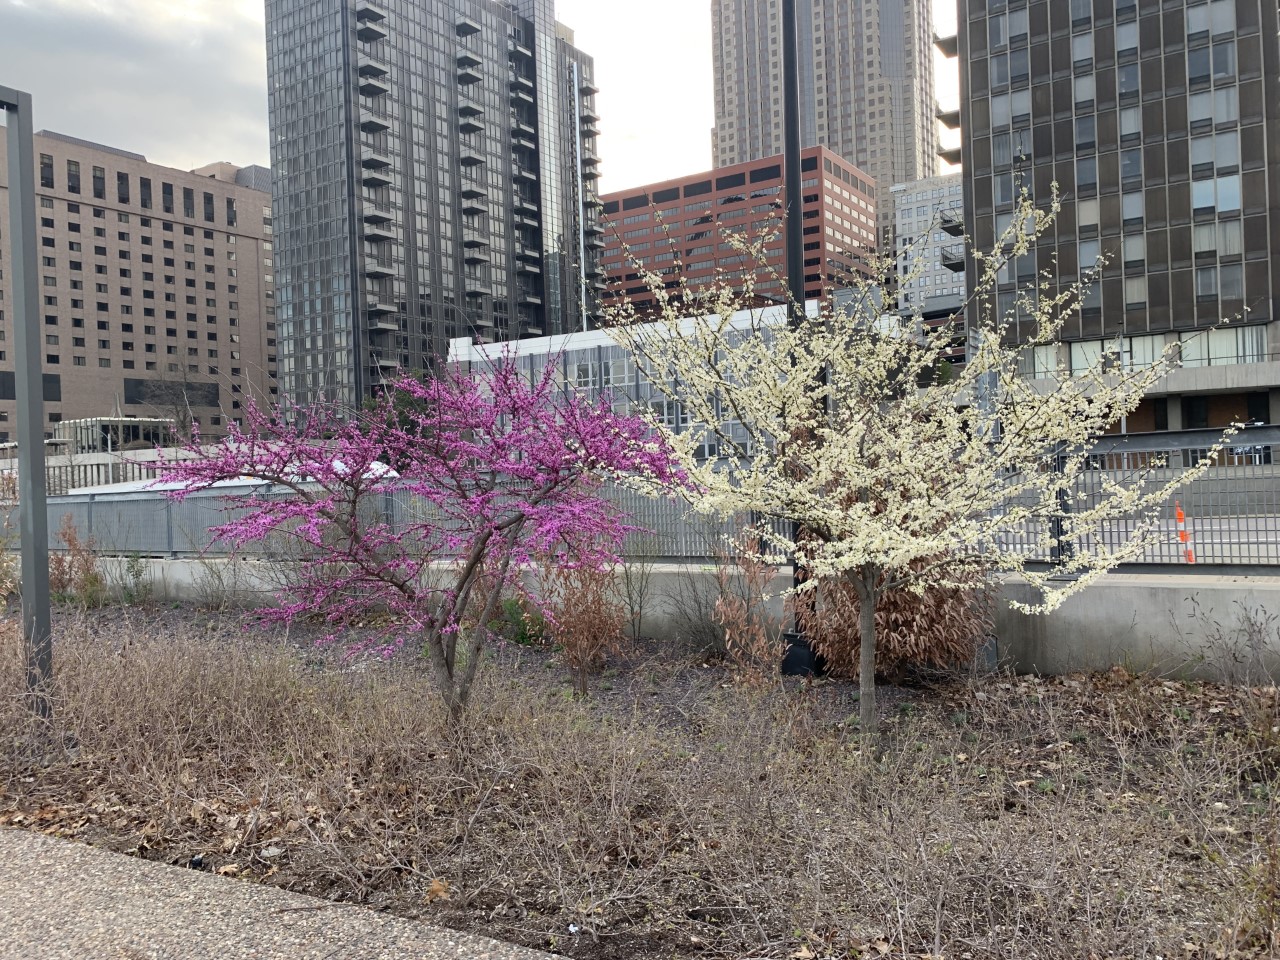 Two trees, one purplish-fuchsia and one white, growing next to each other. City buildings are in the background.